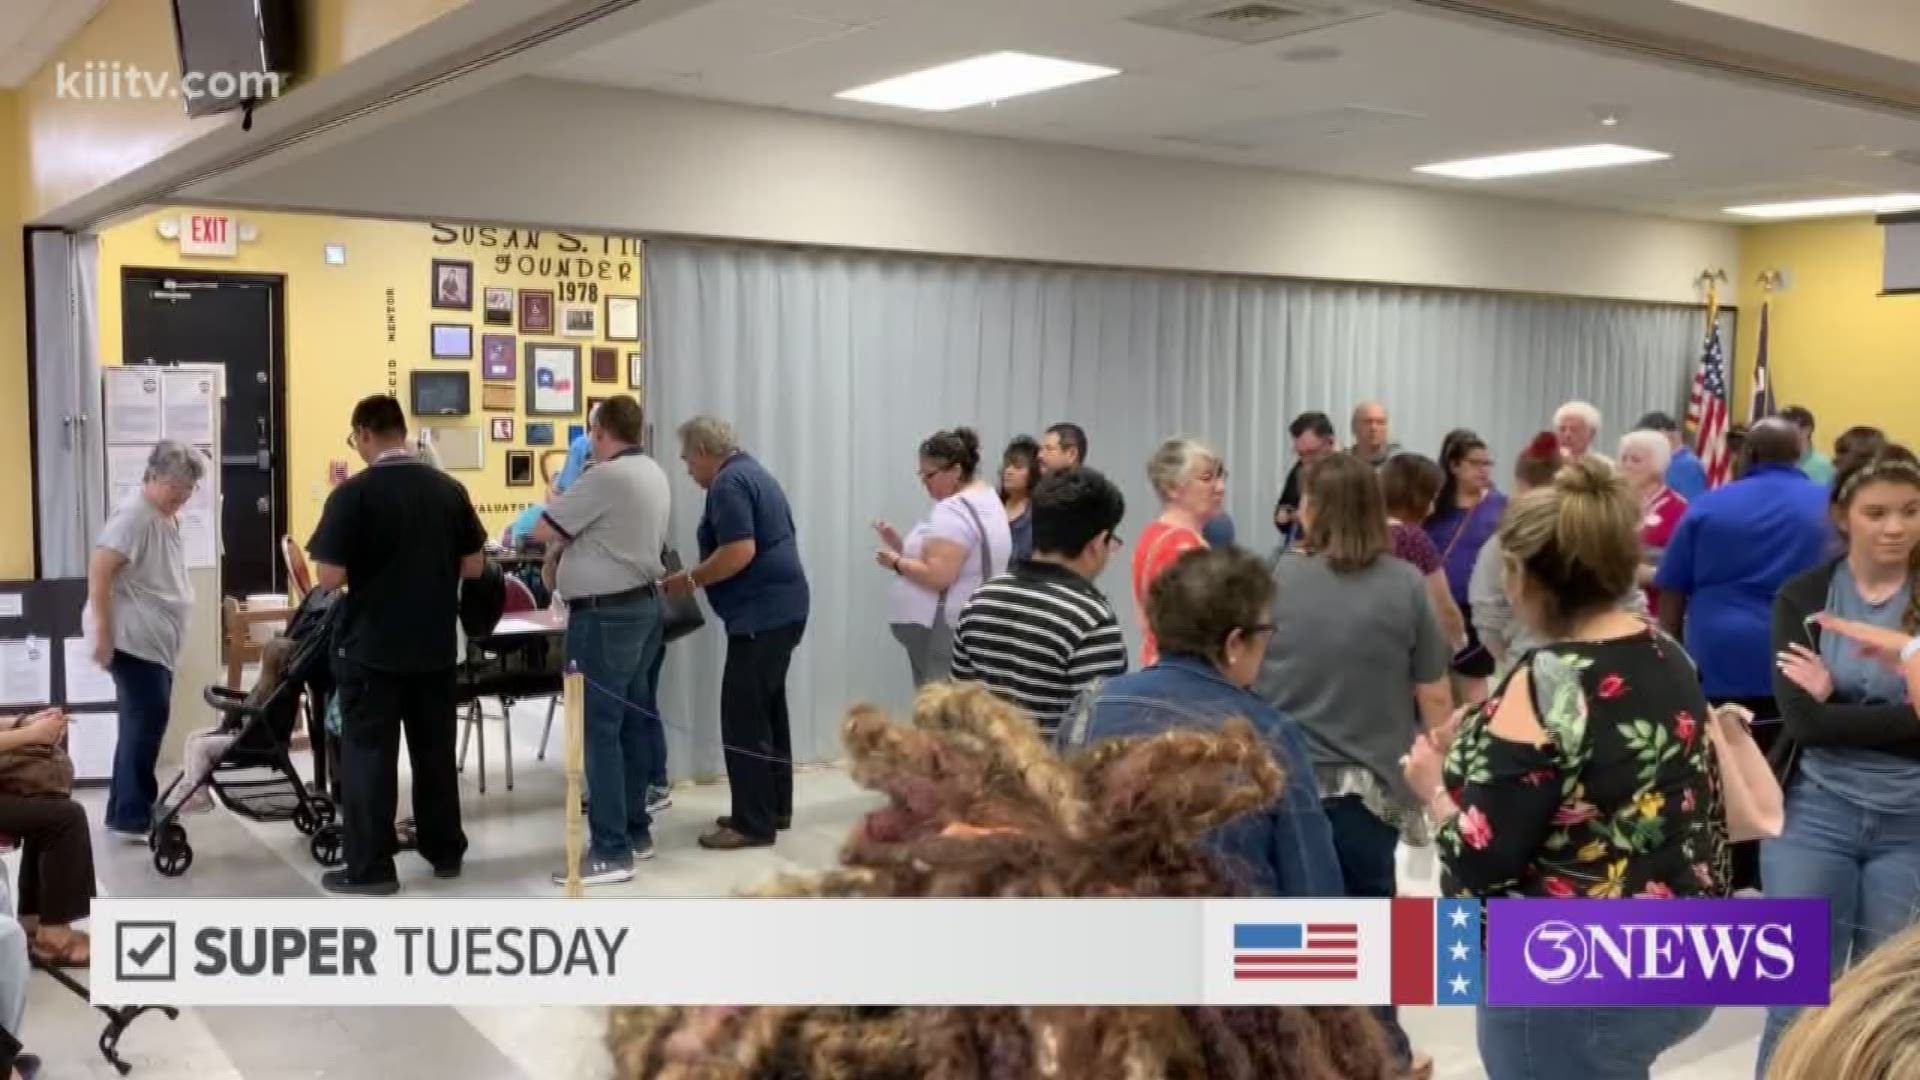 Coastal Bend residents are rushing to the polls this Super Tuesday for the 2020 March Primary elections.